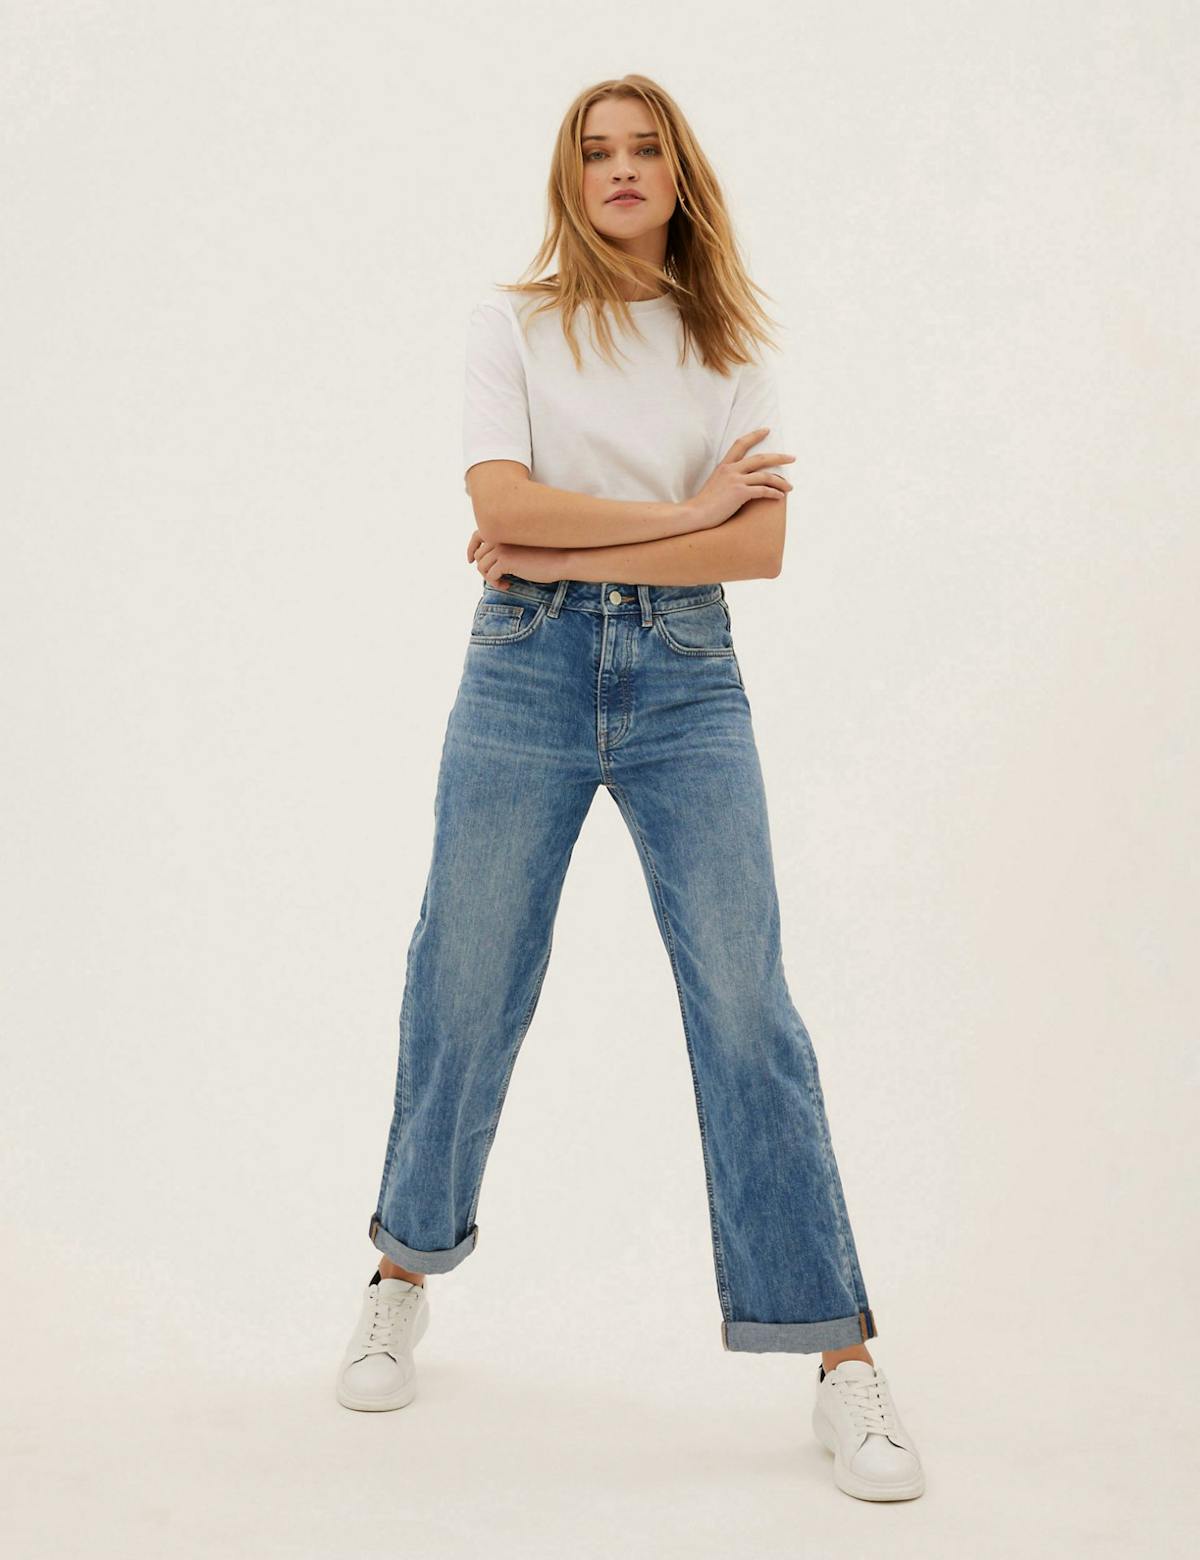 Best jeans trends for A/W22: boyfriend, wide-legged and low-rise